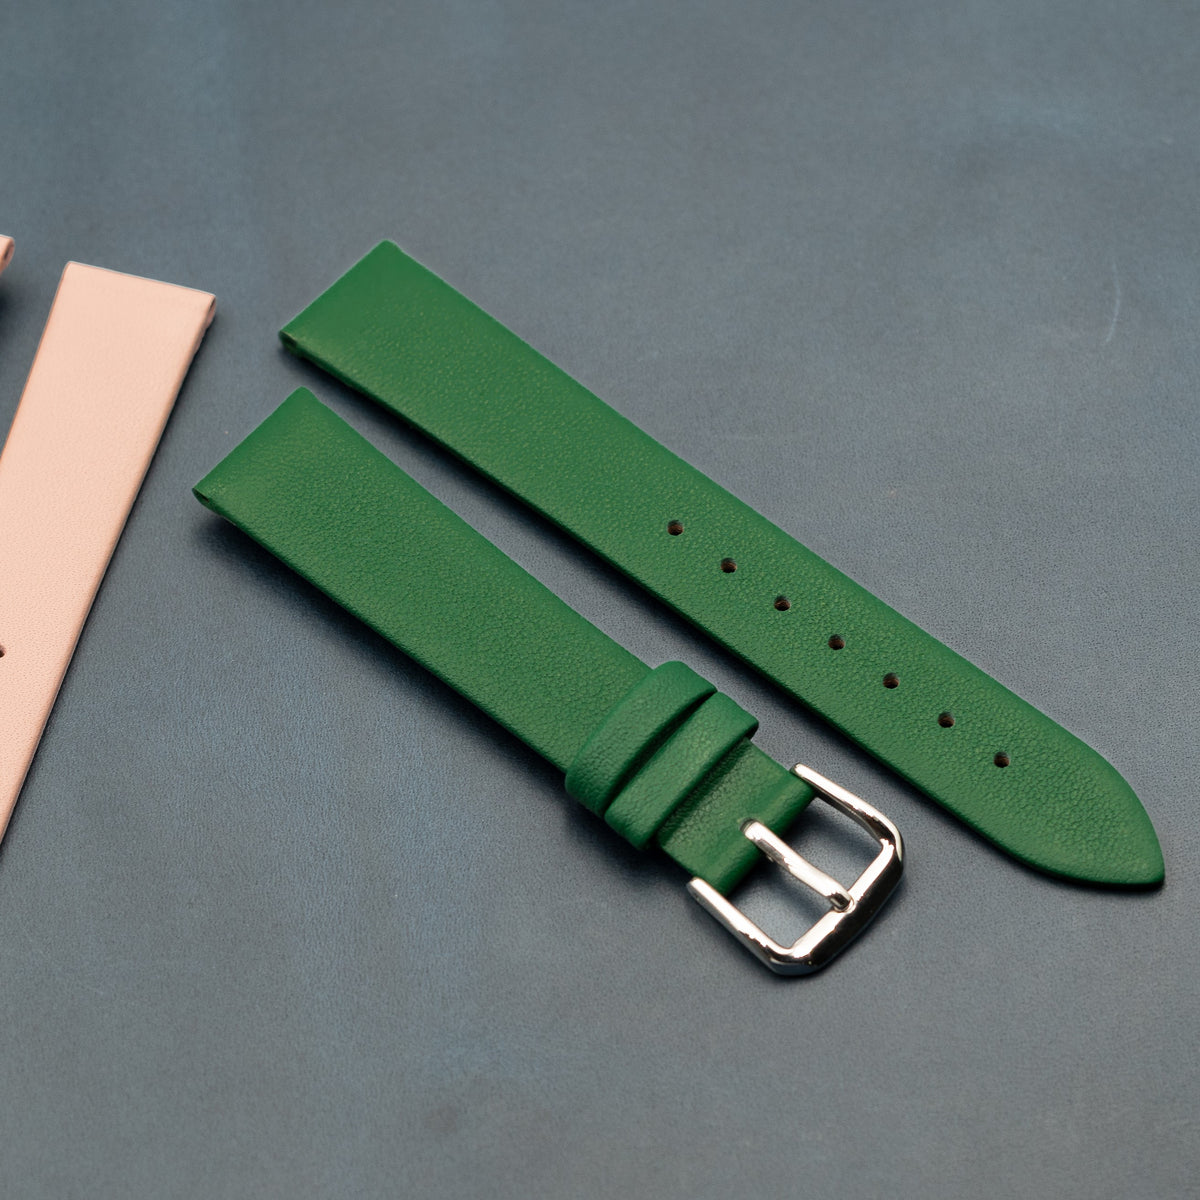 Unstitched Smooth Leather Watch Strap in Green (12mm) - Nomad Watch Works MY